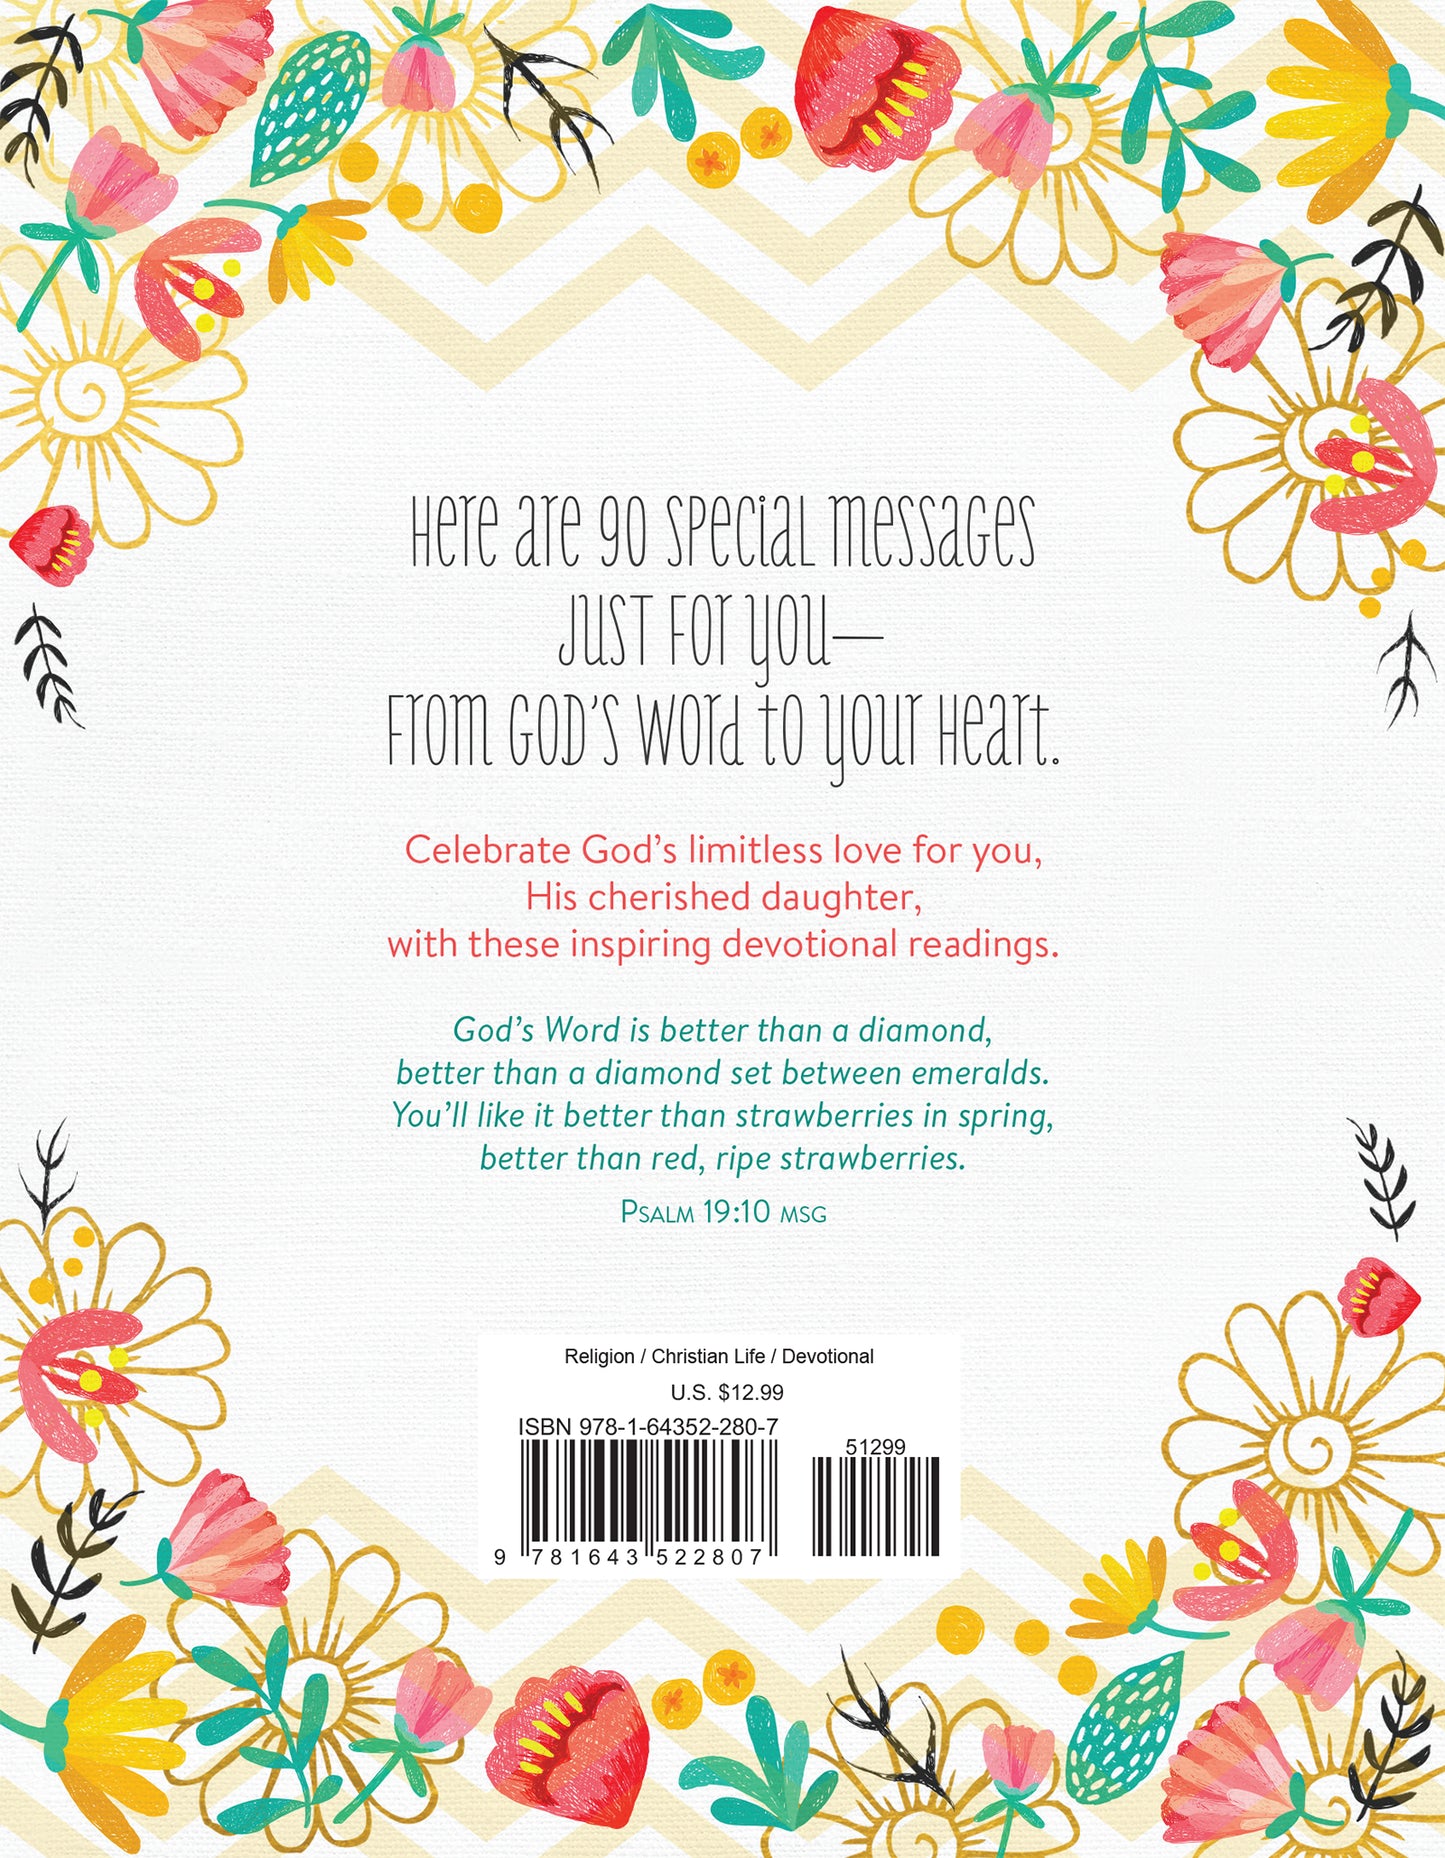 From God's Word to a Woman's Heart - The Christian Gift Company